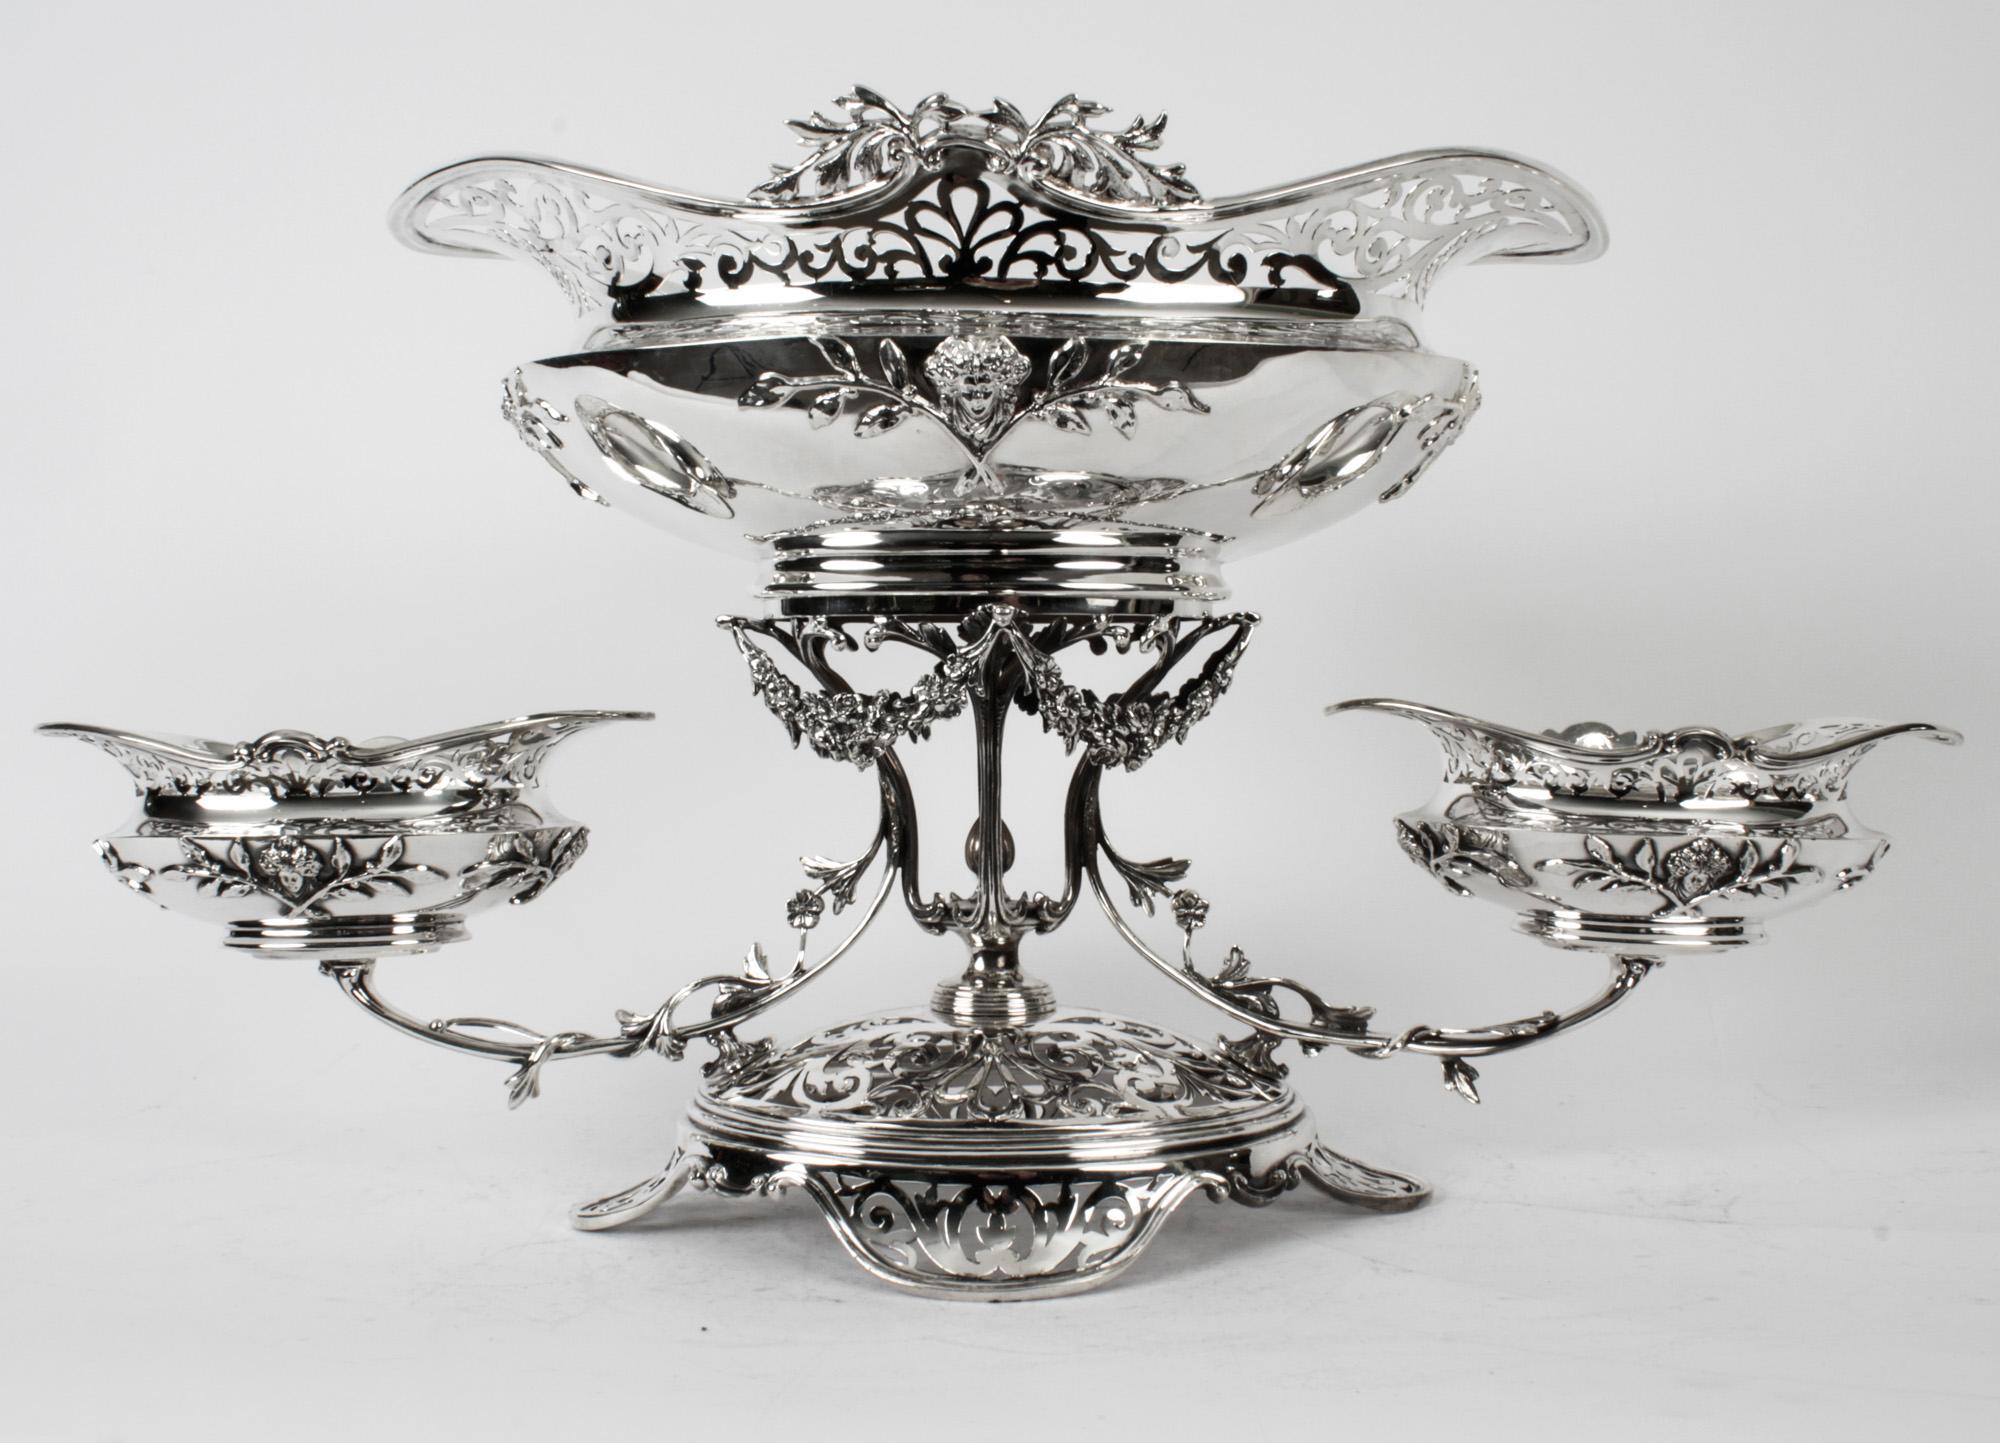 Antique Victorian Silverplate Centrepiece Mappin & Webb 1880 19th Century For Sale 10